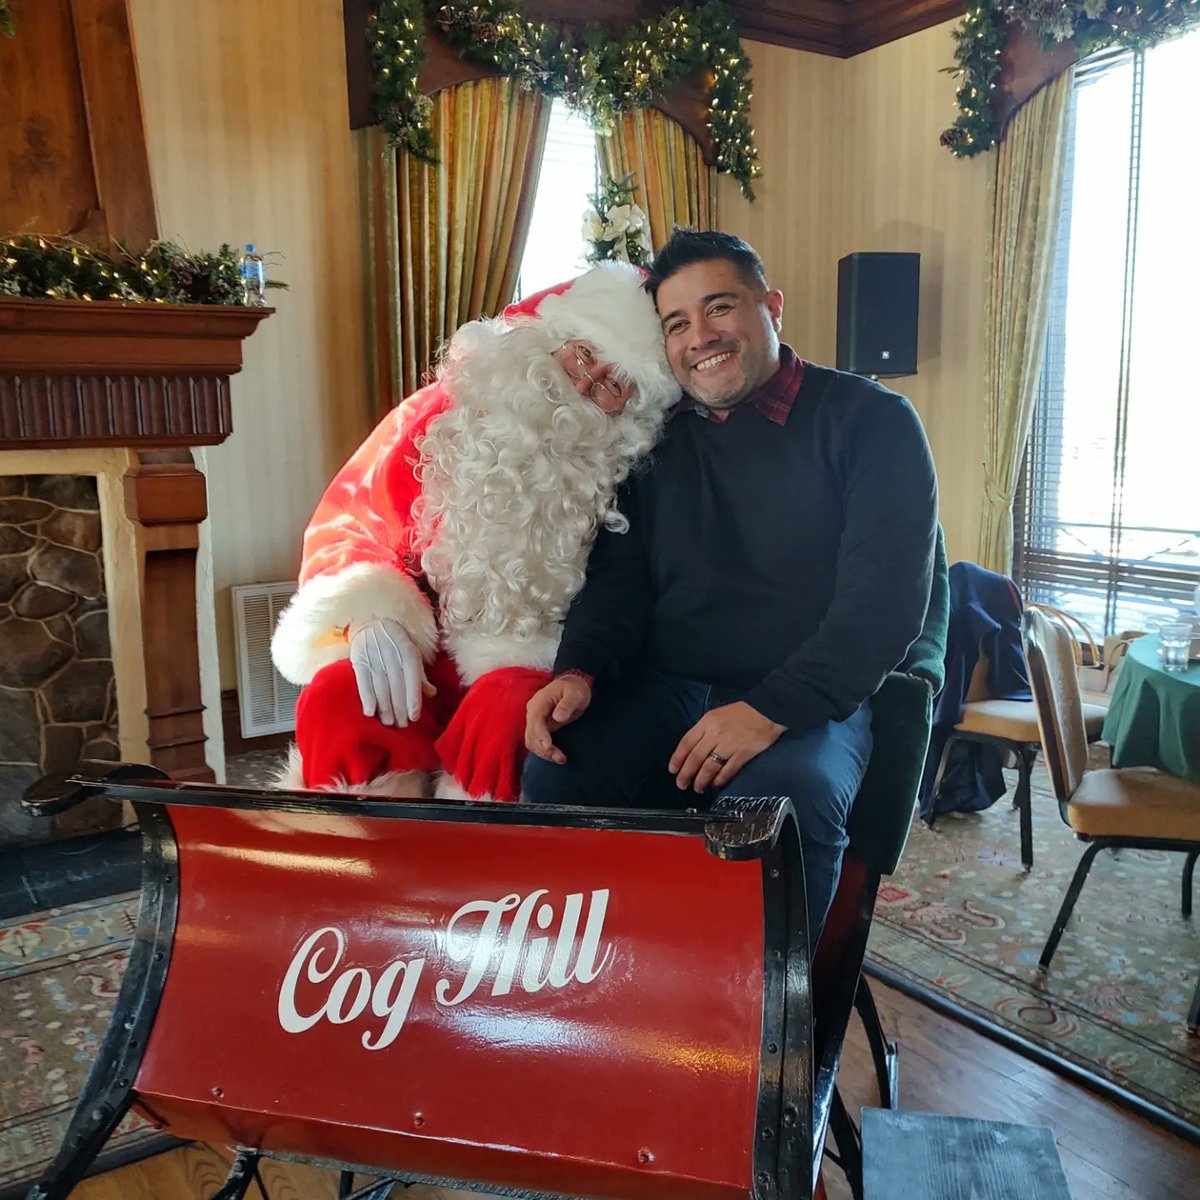 #christmastraditions Another year and another employee event for the fine people at Apple Chevrolet Great food and spectacular service at Cog Hill Golf Club #Santa loves it! 

#happinessproducer #crowdmover #eventdj #illinoisdj #bilingudj #michigandj #chicagosuburbs #djsets